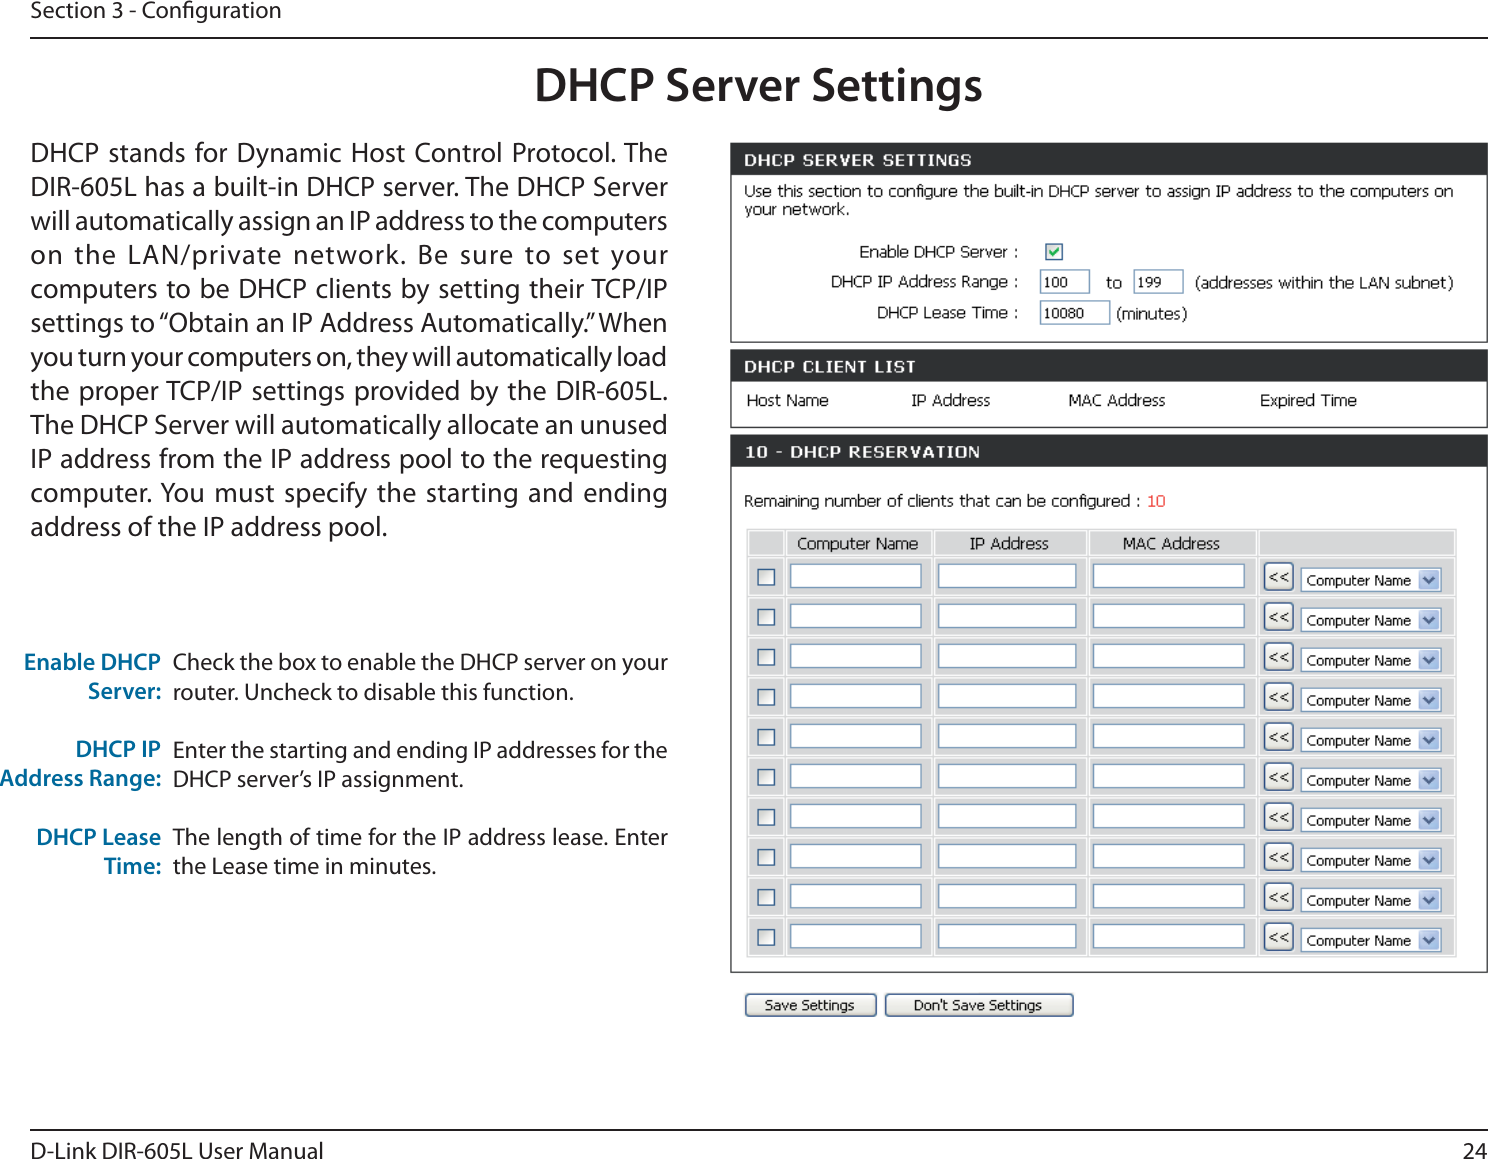 24D-Link DIR-605L User ManualSection 3 - CongurationCheck the box to enable the DHCP server on your router. Uncheck to disable this function.Enter the starting and ending IP addresses for the DHCP server’s IP assignment.The length of time for the IP address lease. Enter the Lease time in minutes.&amp;OBCMF%)$1Server:DHCP IPAddress Range:DHCP Lease Time:DHCP Server SettingsDHCP stands for Dynamic Host Control Protocol. The DIR-605L has a built-in DHCP server. The DHCP Server will automatically assign an IP address to the computers POUIF -&quot;/QSJWBUFOFUXPSL#F TVSFUPTFUZPVScomputers to be DHCP clients by setting their TCP/IP TFUUJOHTUPi0CUBJOBO*1&quot;EESFTT&quot;VUPNBUJDBMMZw8IFOyou turn your computers on, they will automatically load the proper TCP/IP settings provided by the DIR-605L. The DHCP Server will automatically allocate an unused IP address from the IP address pool to the requesting computer. You must specify the starting and ending address of the IP address pool.